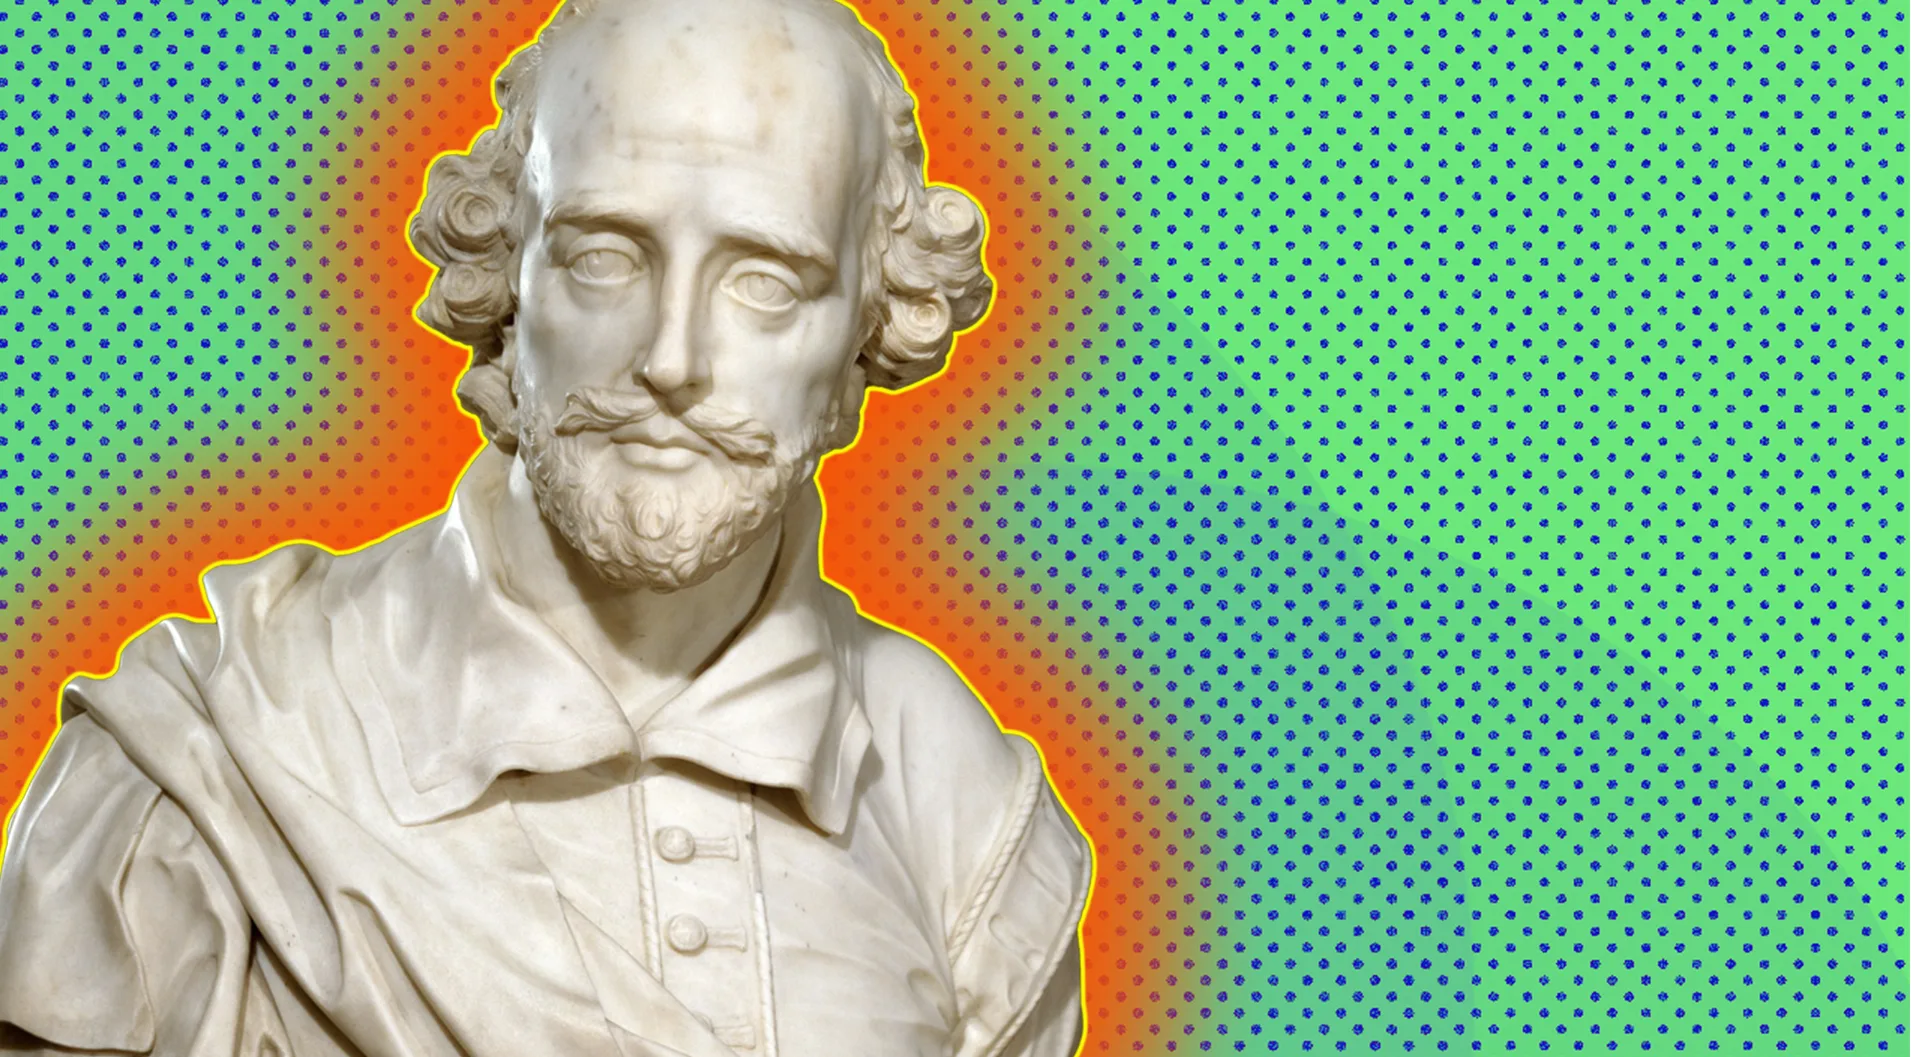 A bust of Shakespeare with an orange glow on a green background